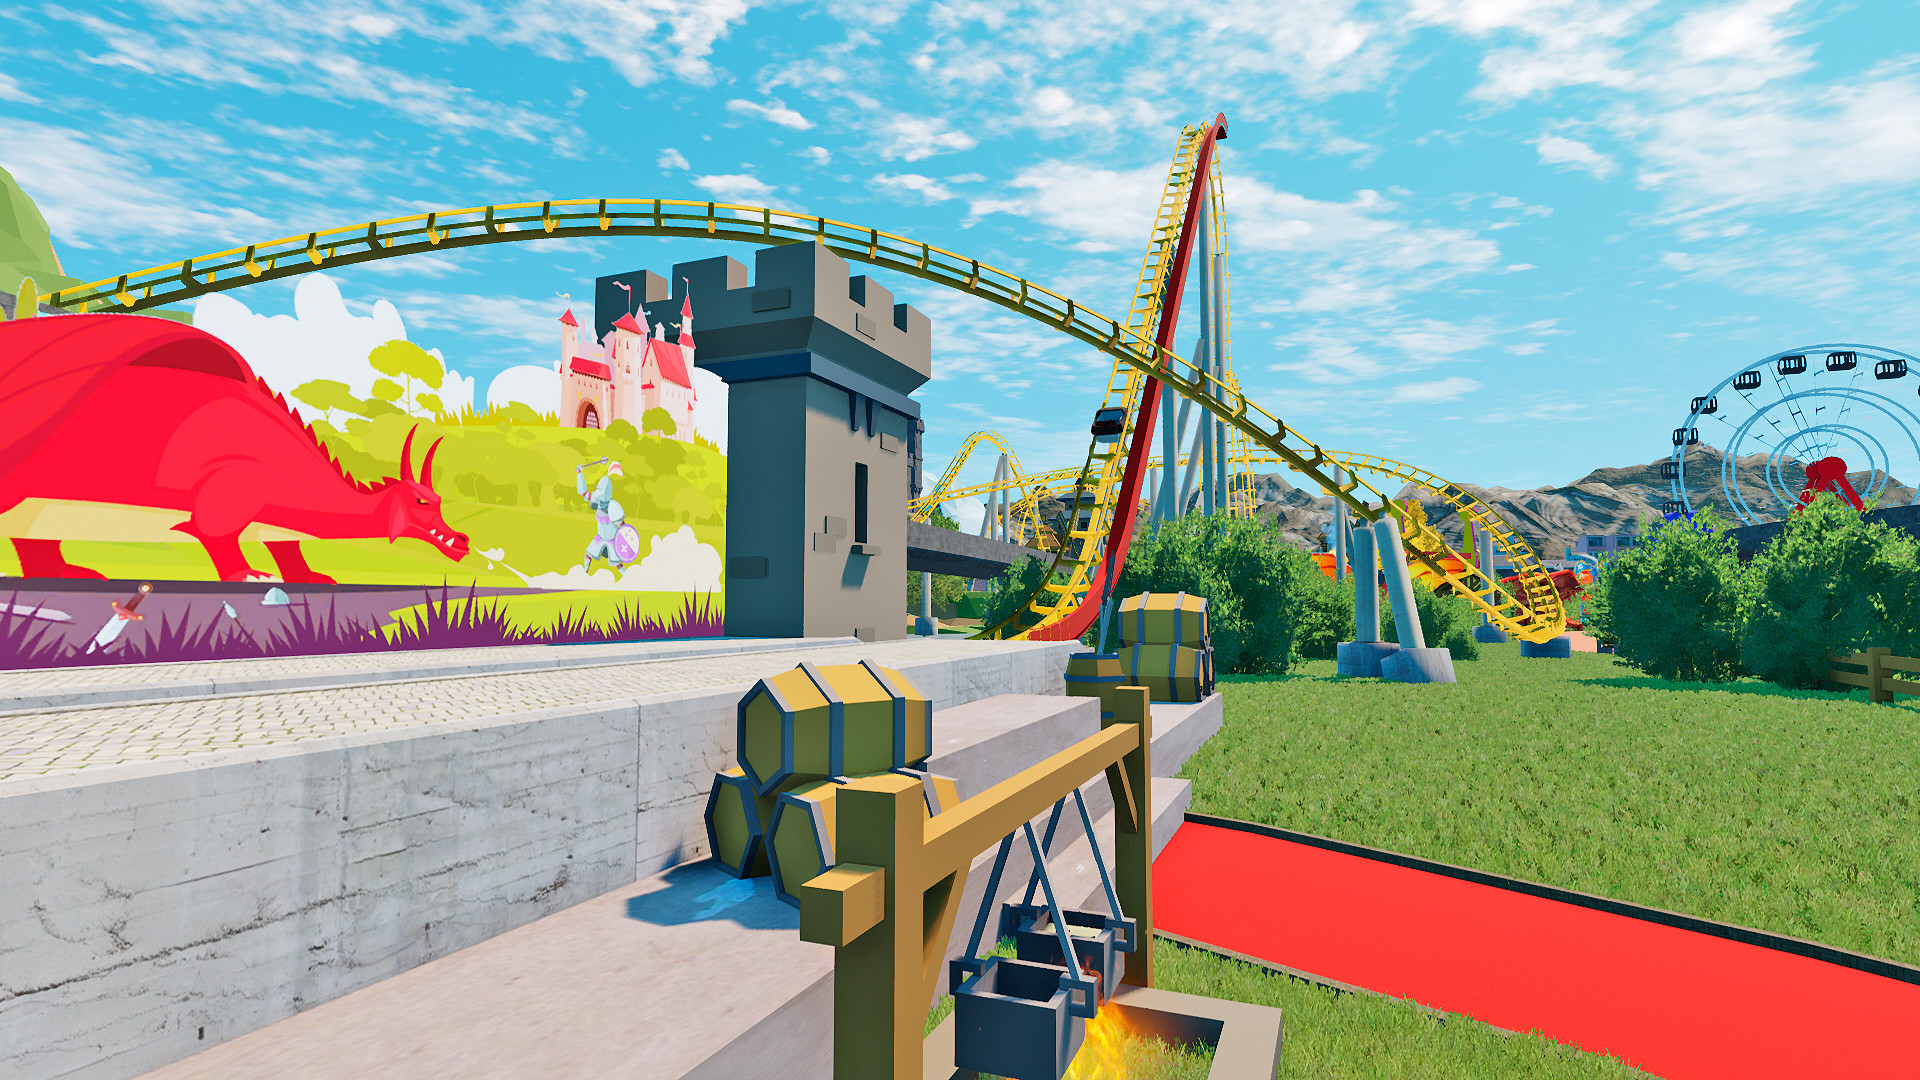 Orlando Theme Park VR - Roller Coaster and Rides on Steam